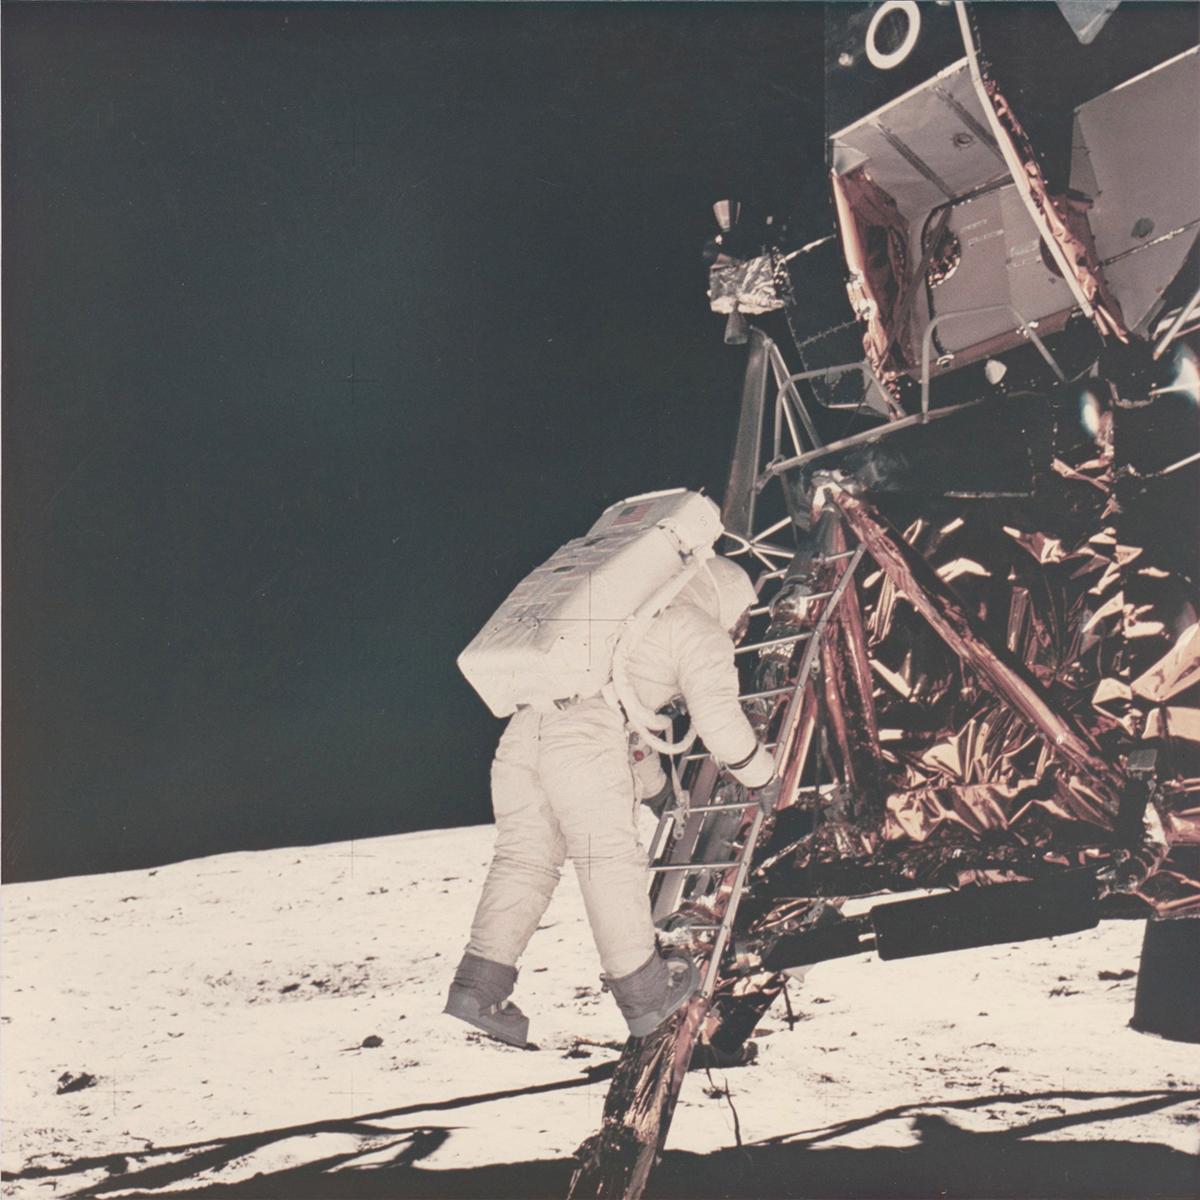 Patrick Parrish is excited to offer an incredible group of original photographs printed by Meisel Photochrome Corporation of Dallas around 1970, shortly after the Apollo 11 Mission. Meisel was the official photo contractor for NASA and processed all